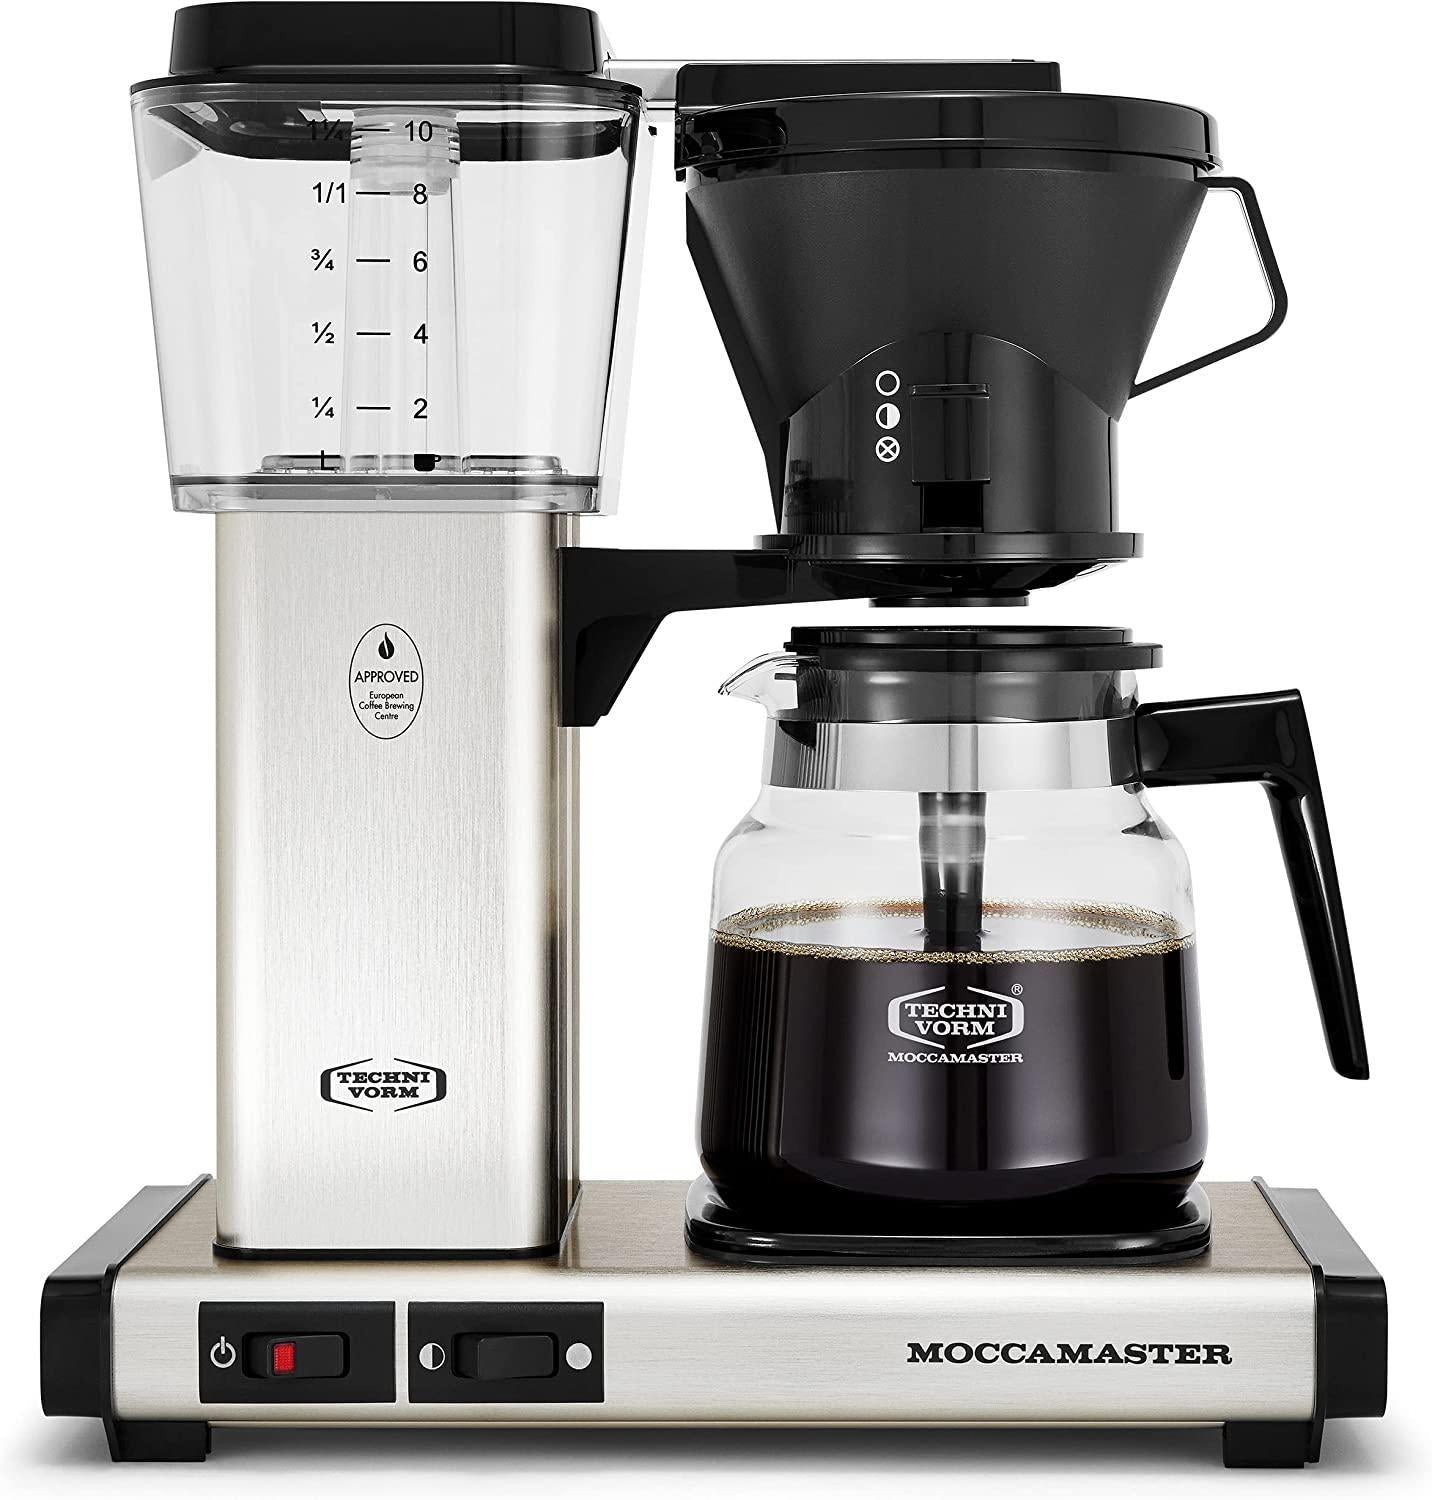 Moccamaster KBGT Thermal Brewer 10-Cup Off-White Coffee Maker + Reviews